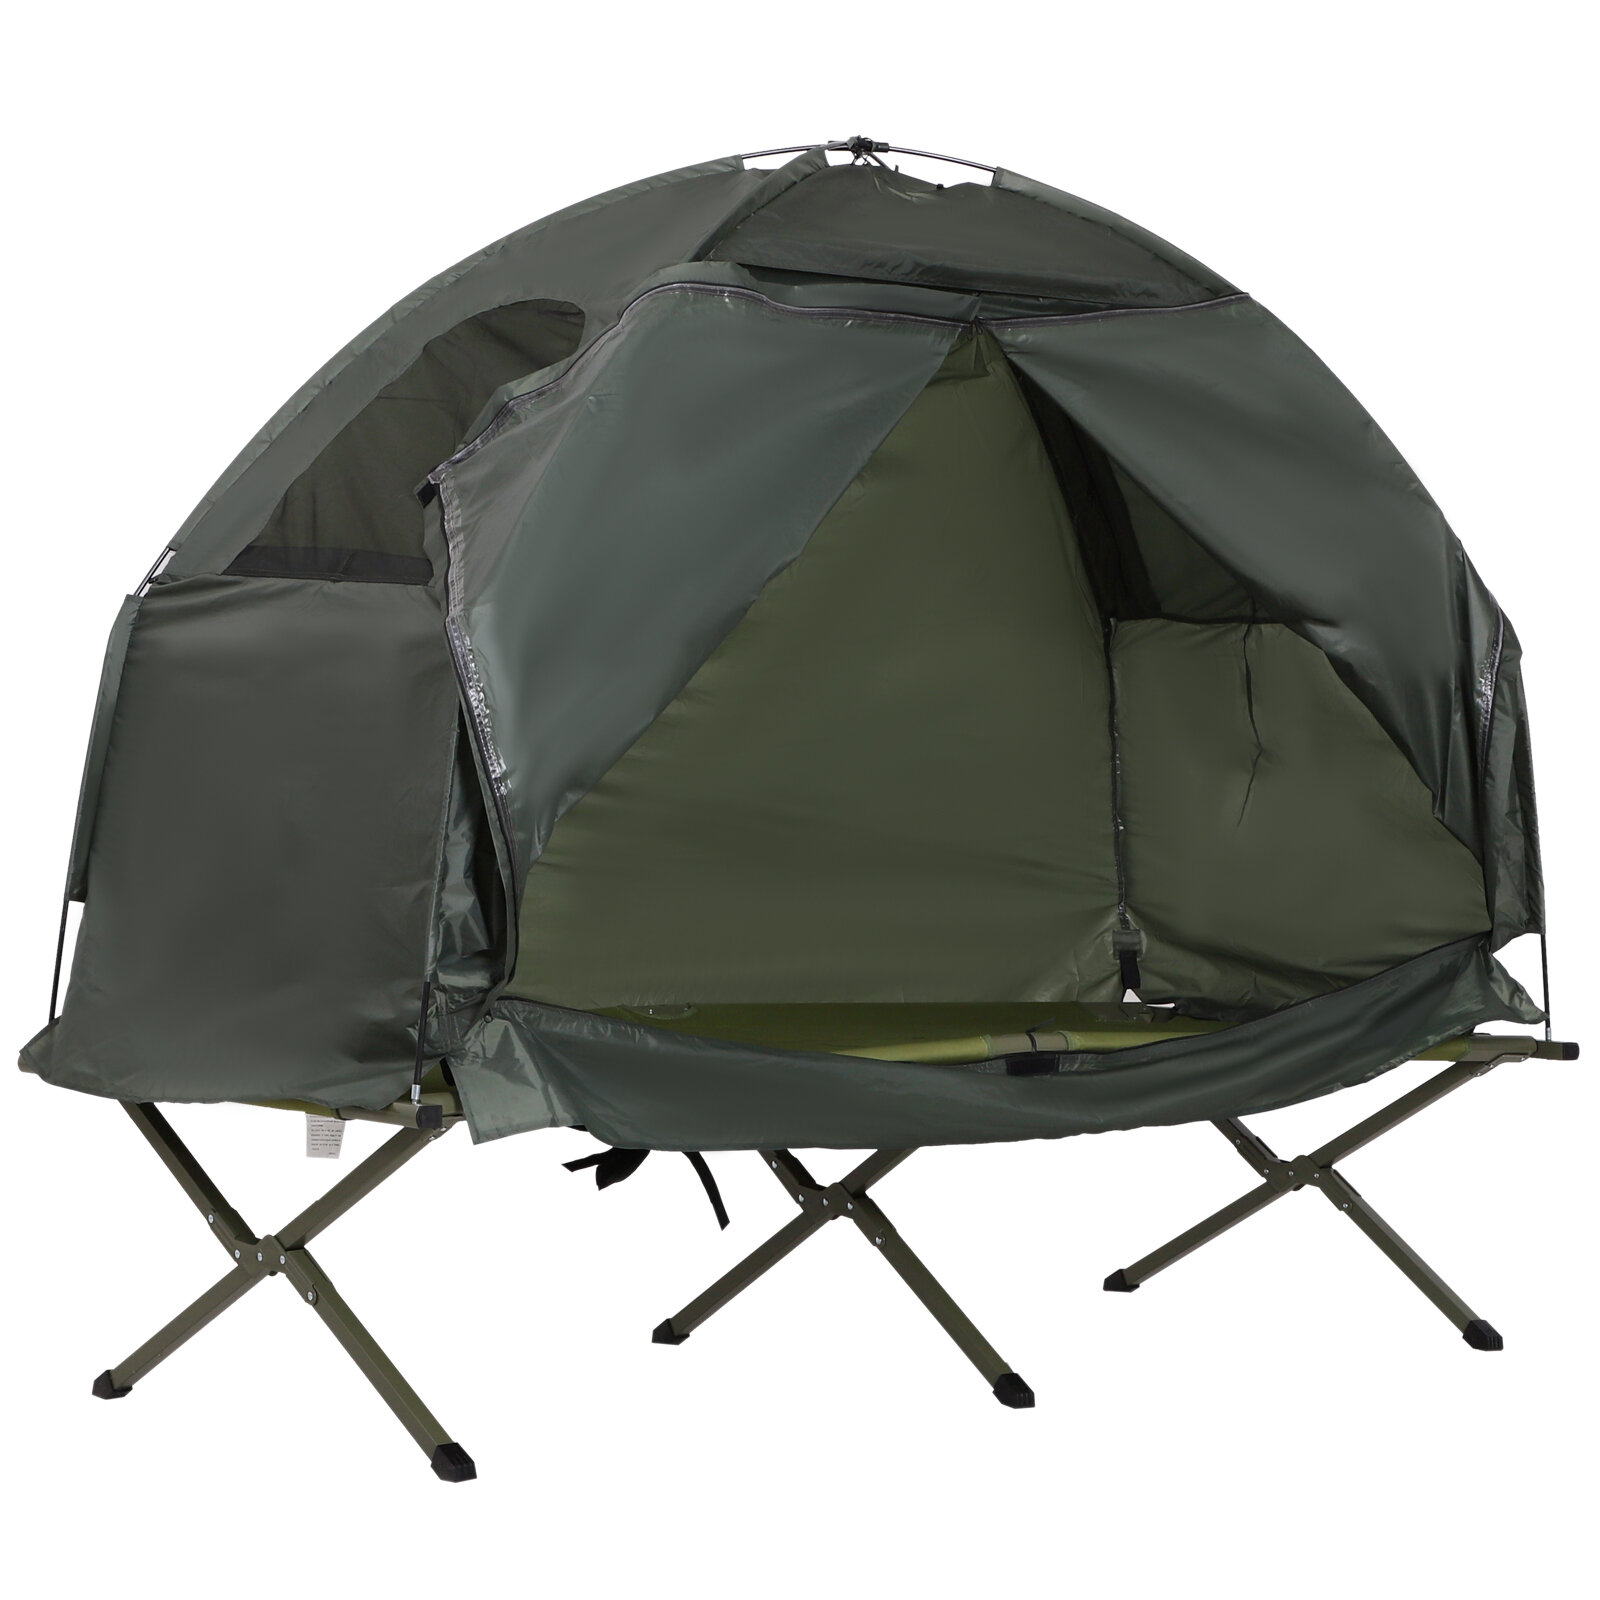 Outsunny 2 Person Tent & Reviews